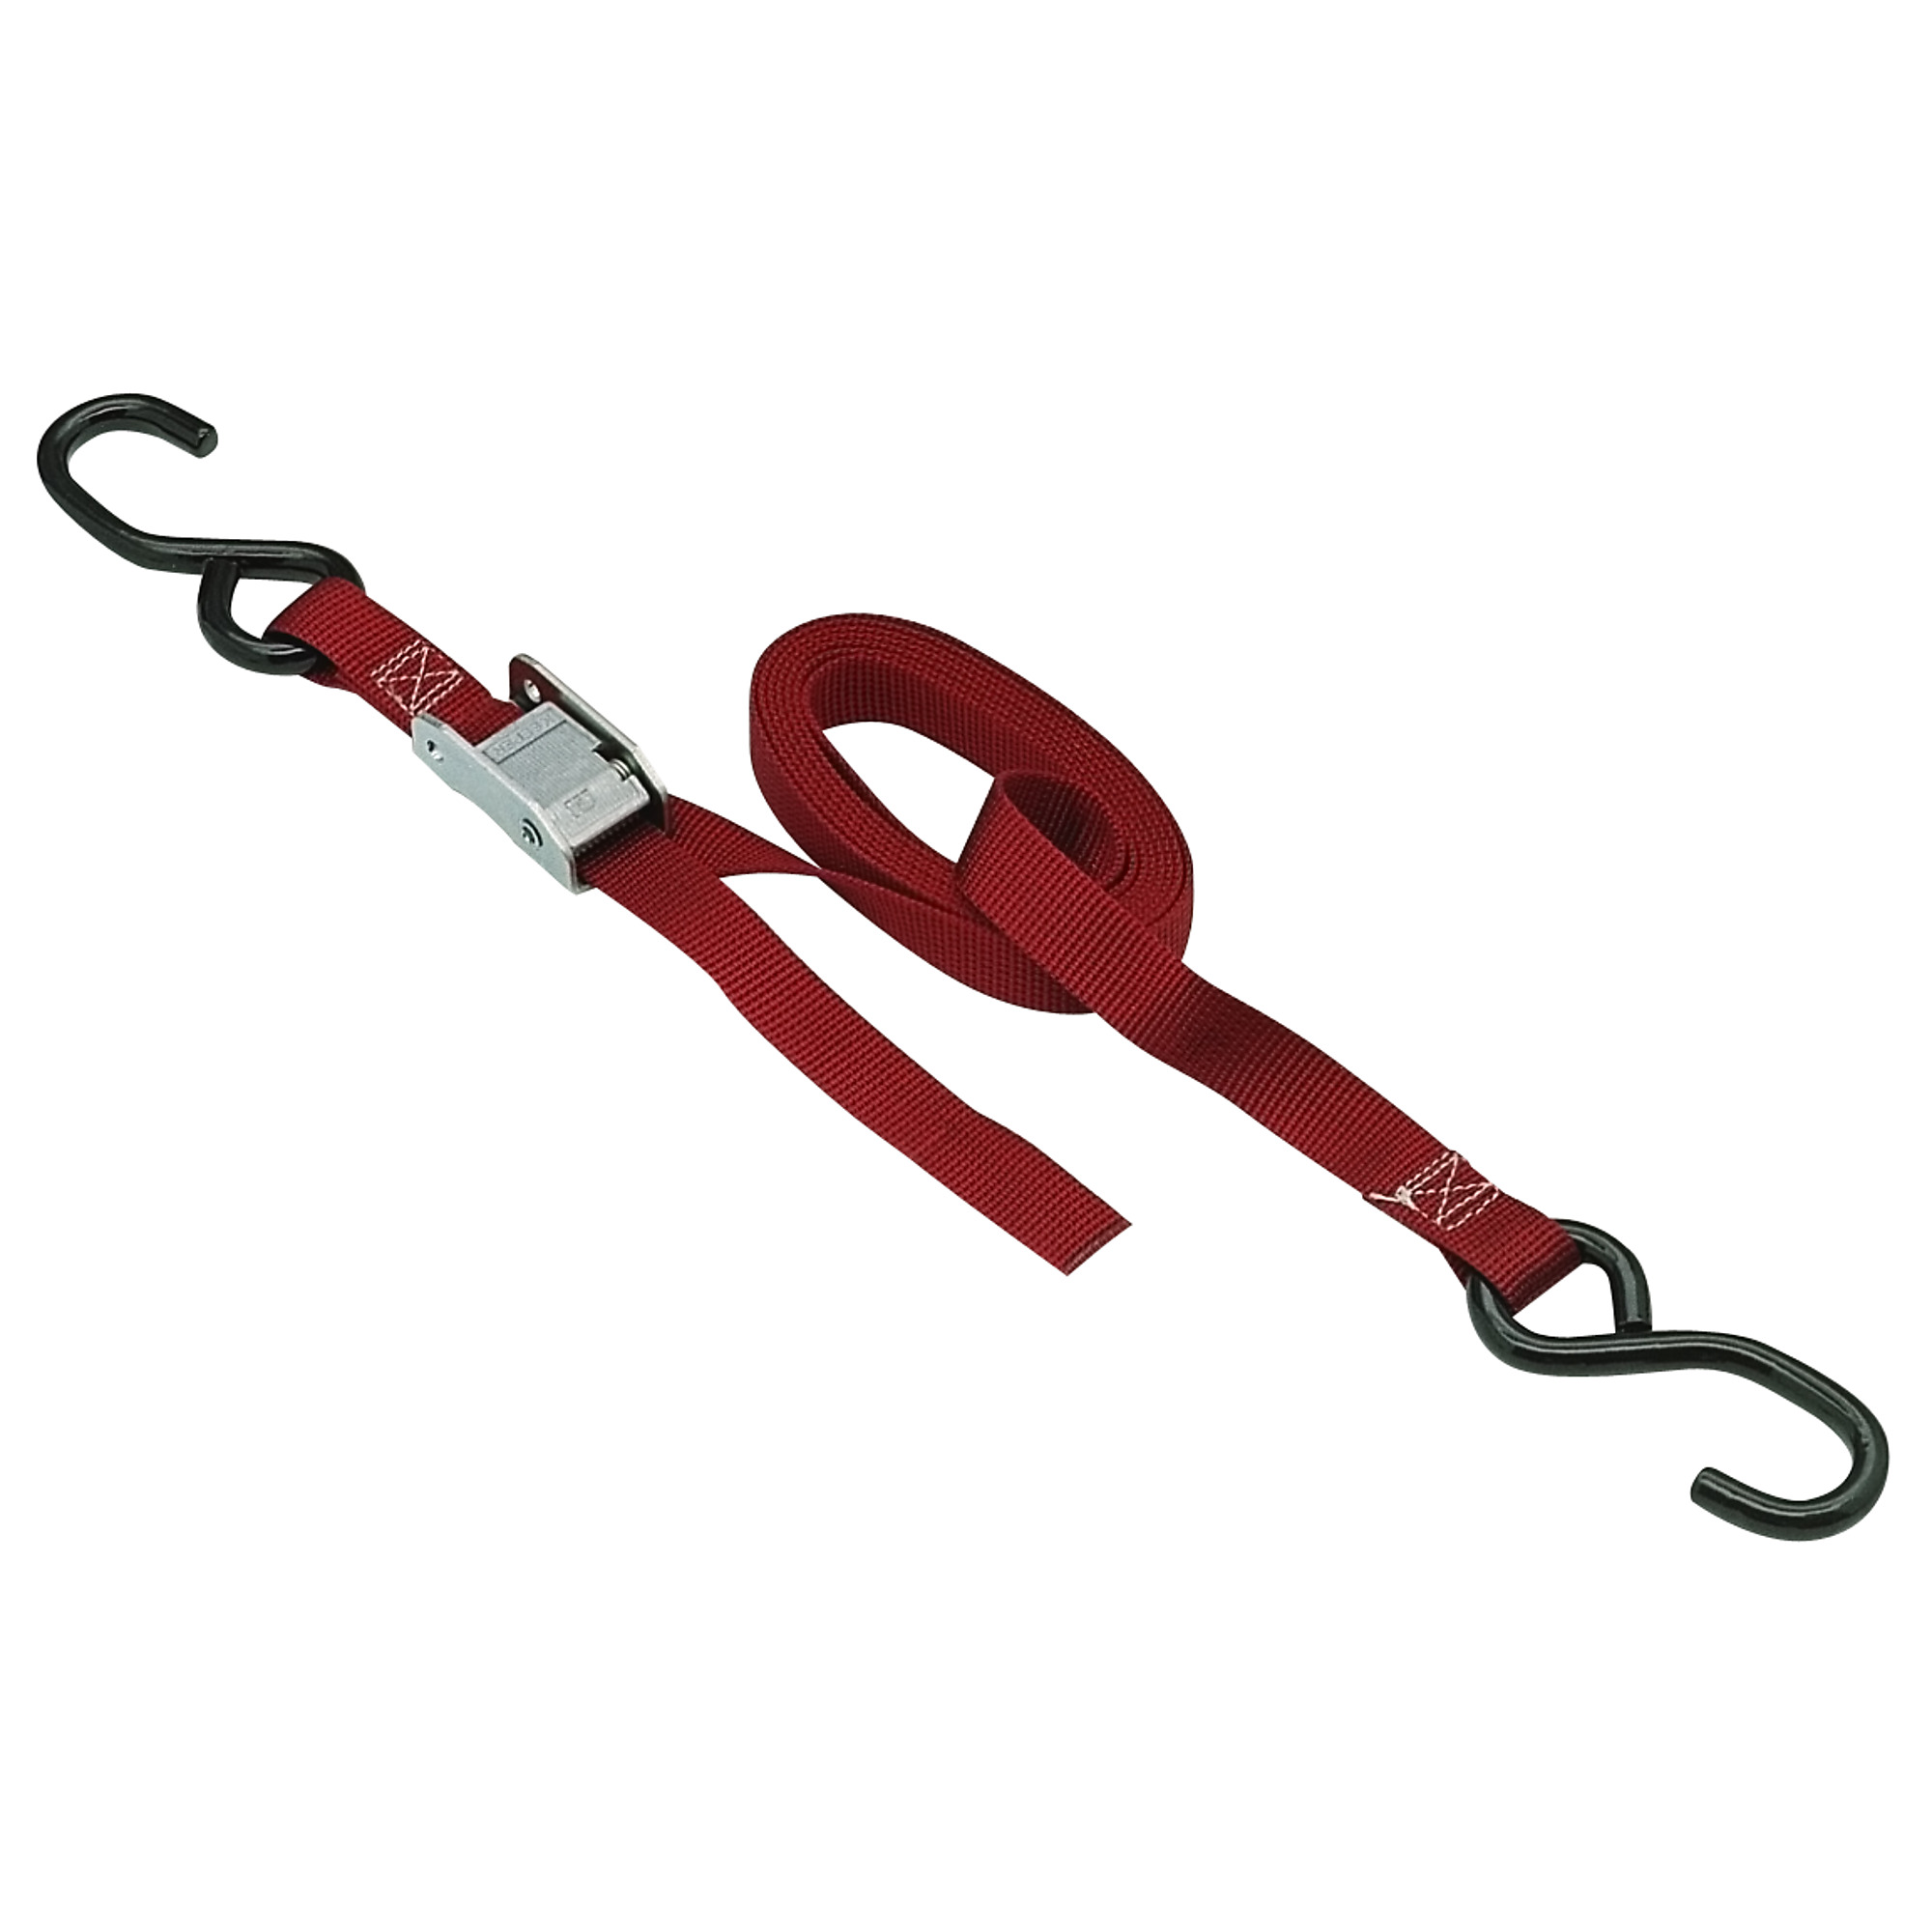 American Power Pull, 1Inch x 5.5ft. Tie Down 2400 lb capacity, Straps (qty.) 2 Model 16550